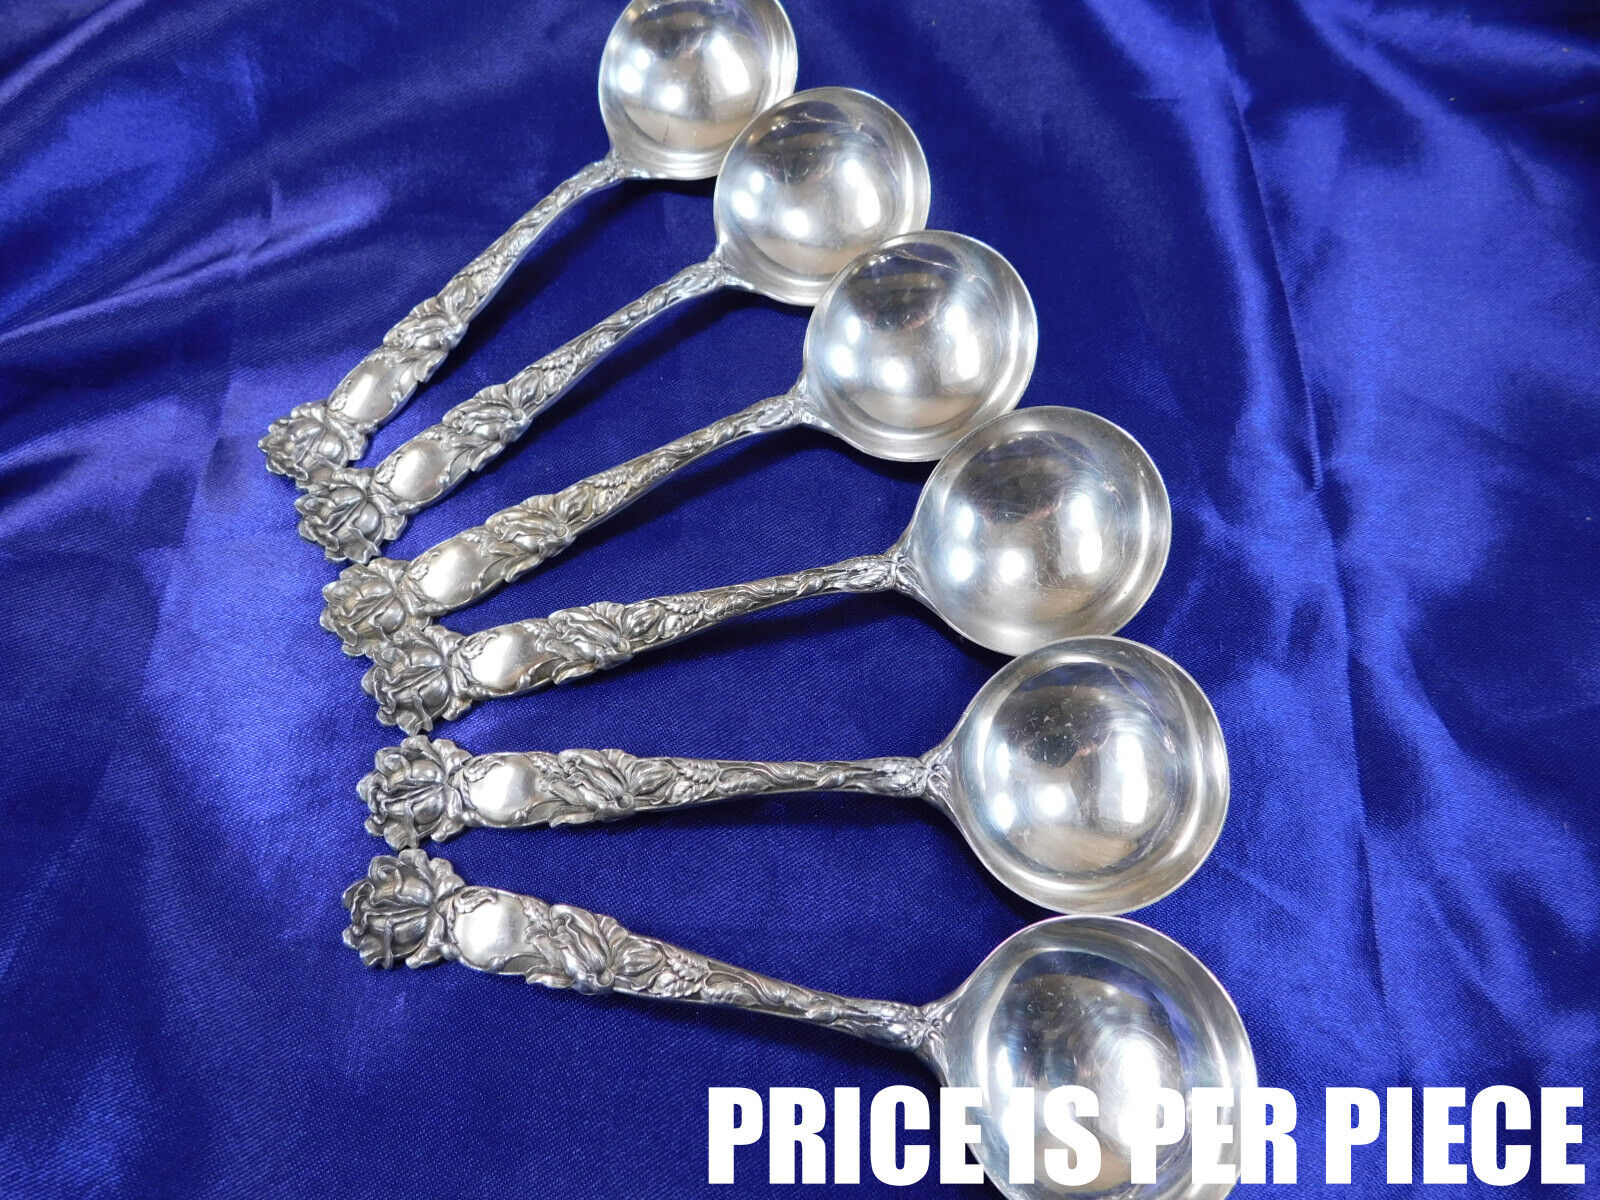 ALVIN BRIDAL ROSE STERLING SILVER BOUILLON SOUP SPOON - VERY GOOD CONDITION